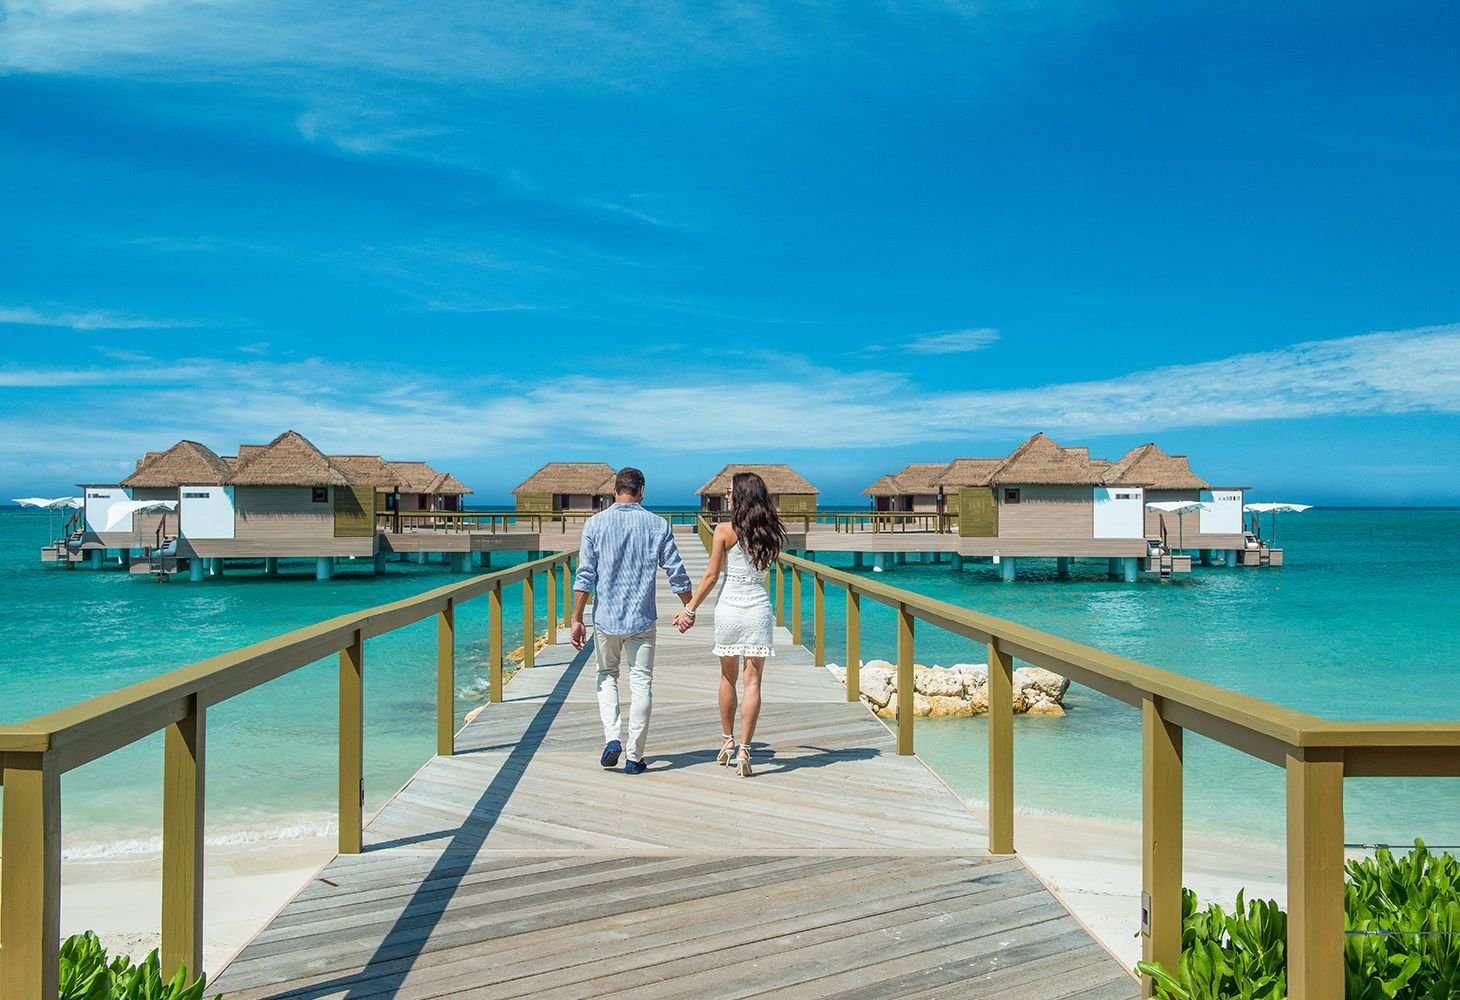 Five Great Things About Sandals Royal Caribbeans Overwater Suites   TravelPulse